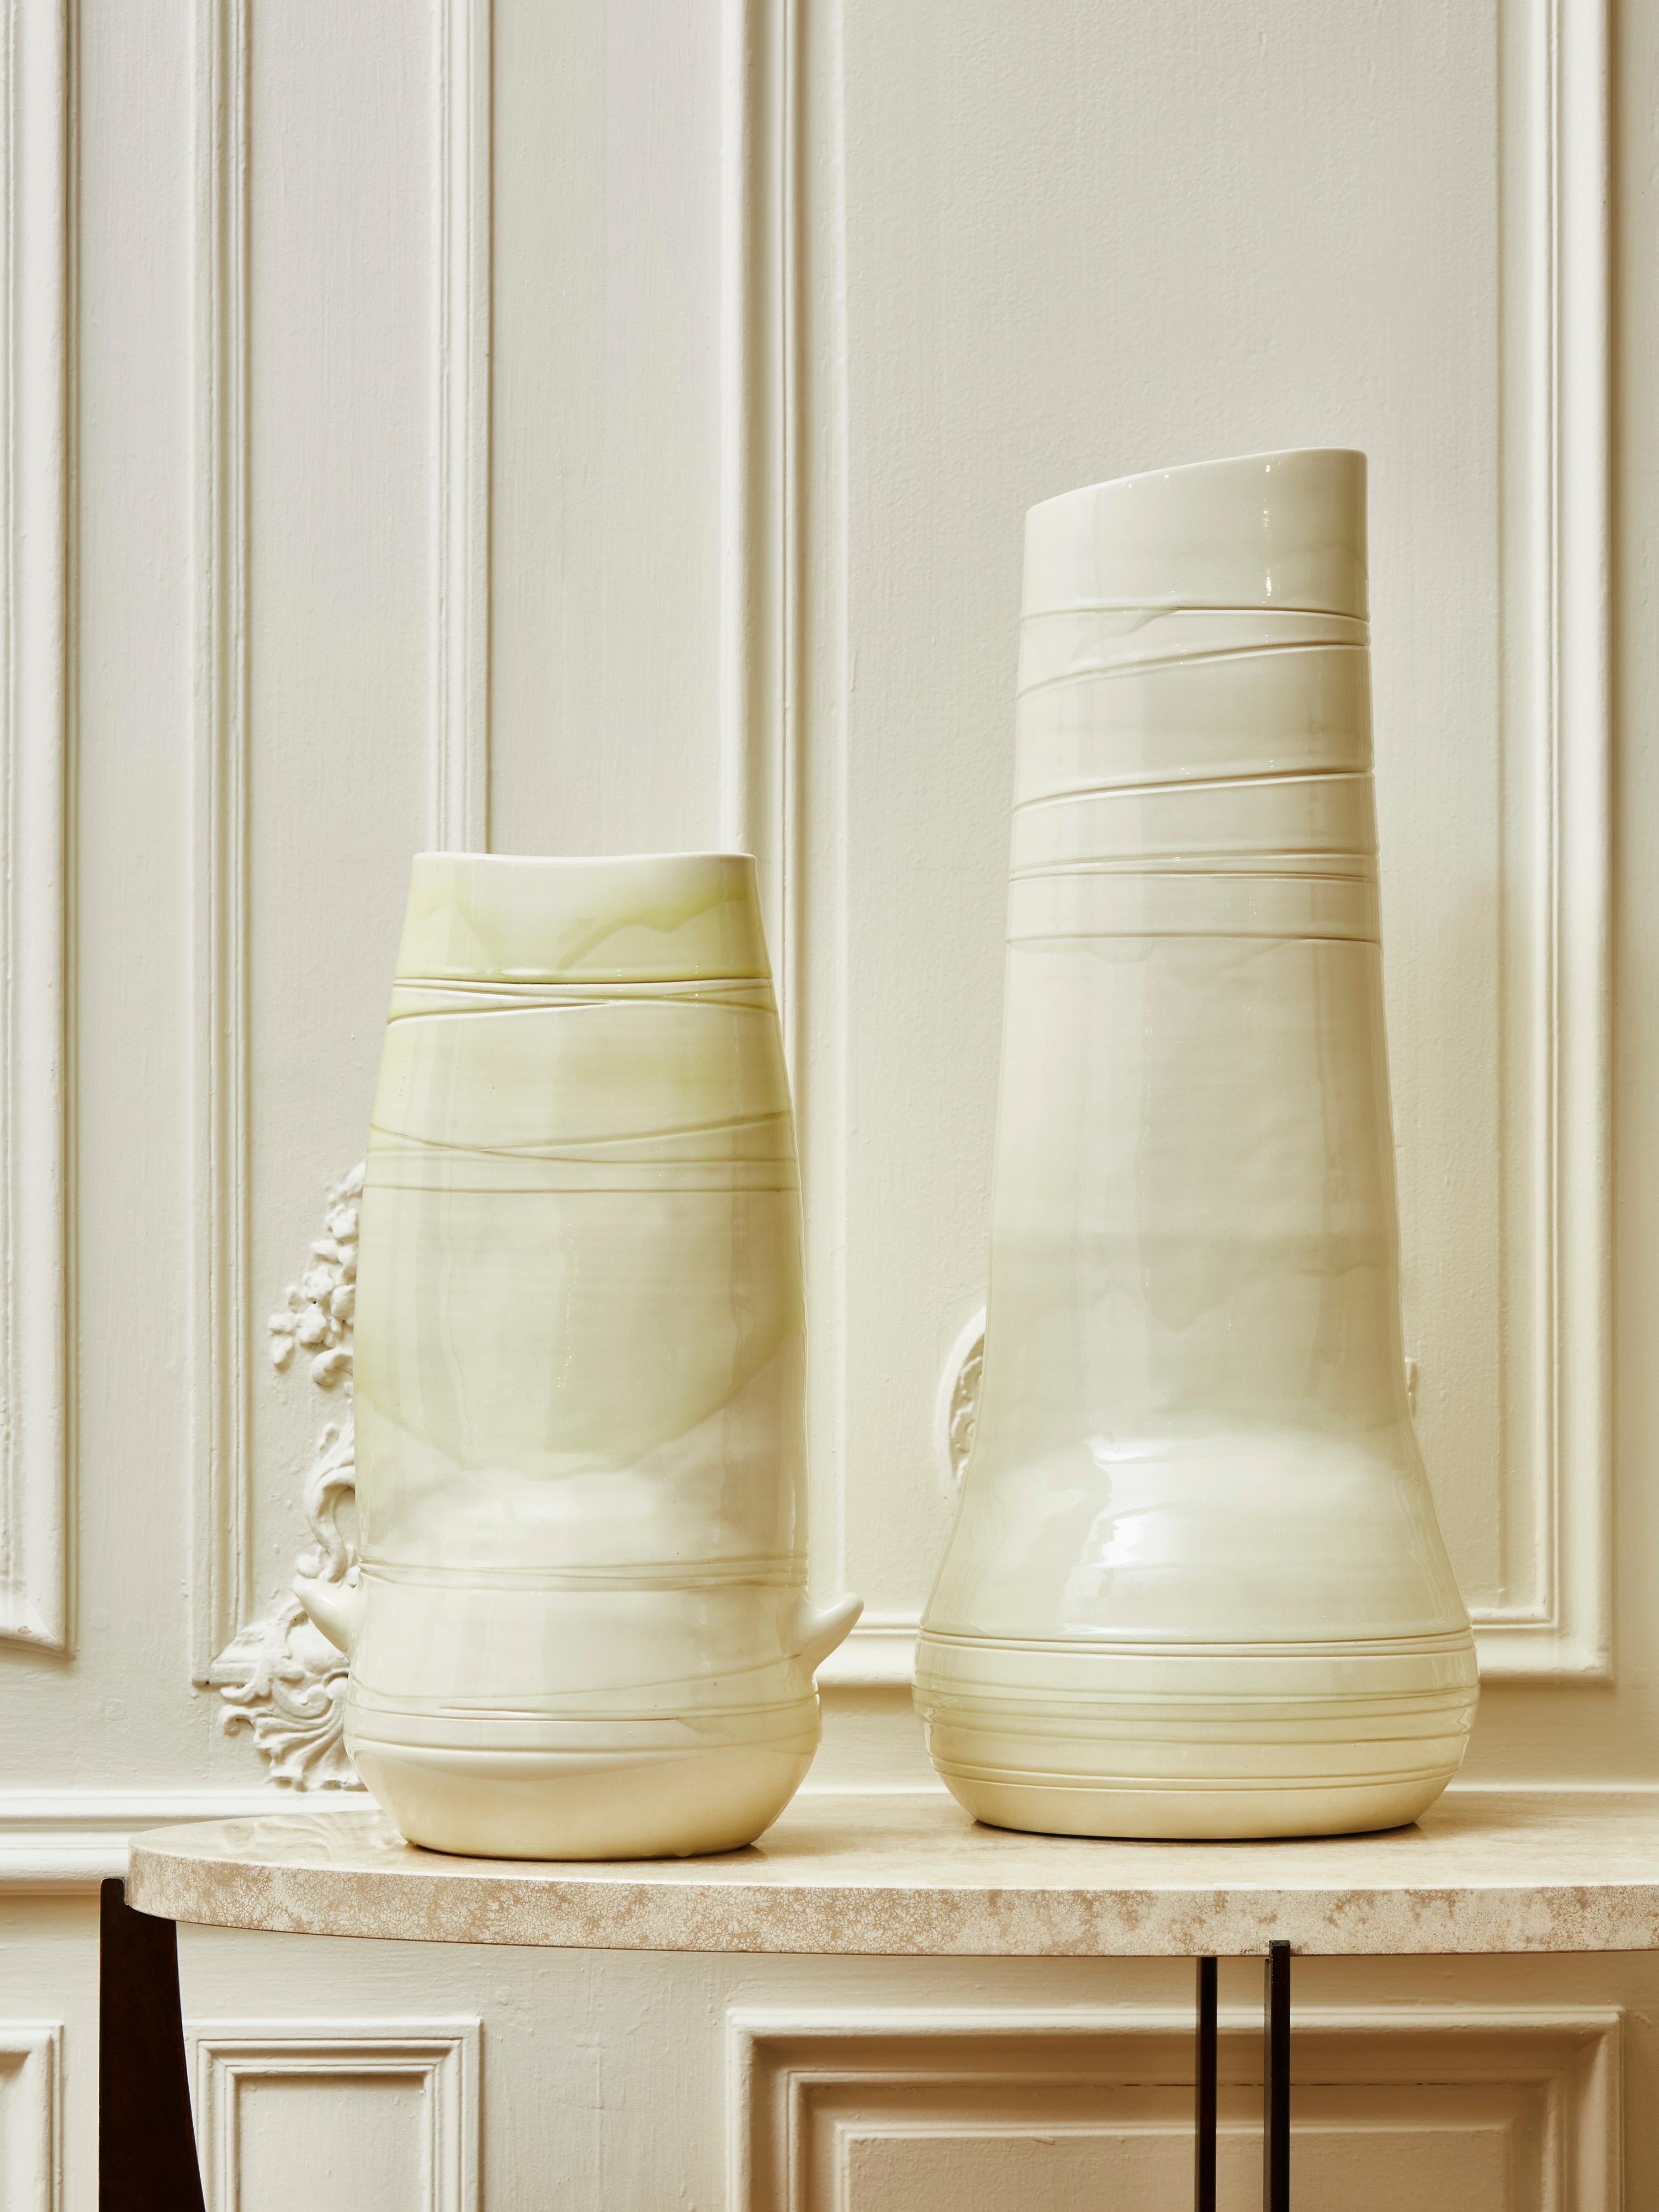 Pair of ceramic vases, signed and dated by the artist Salvatore Parisi.
France, 2013.

Dimensions:
- 26 x 21 x H 45 cm
- Ø 26 x H 65 cm


Salvatore Parisi, born in 1953 in Lorraine, France.
1973: Started the ceramic work in Vaison le